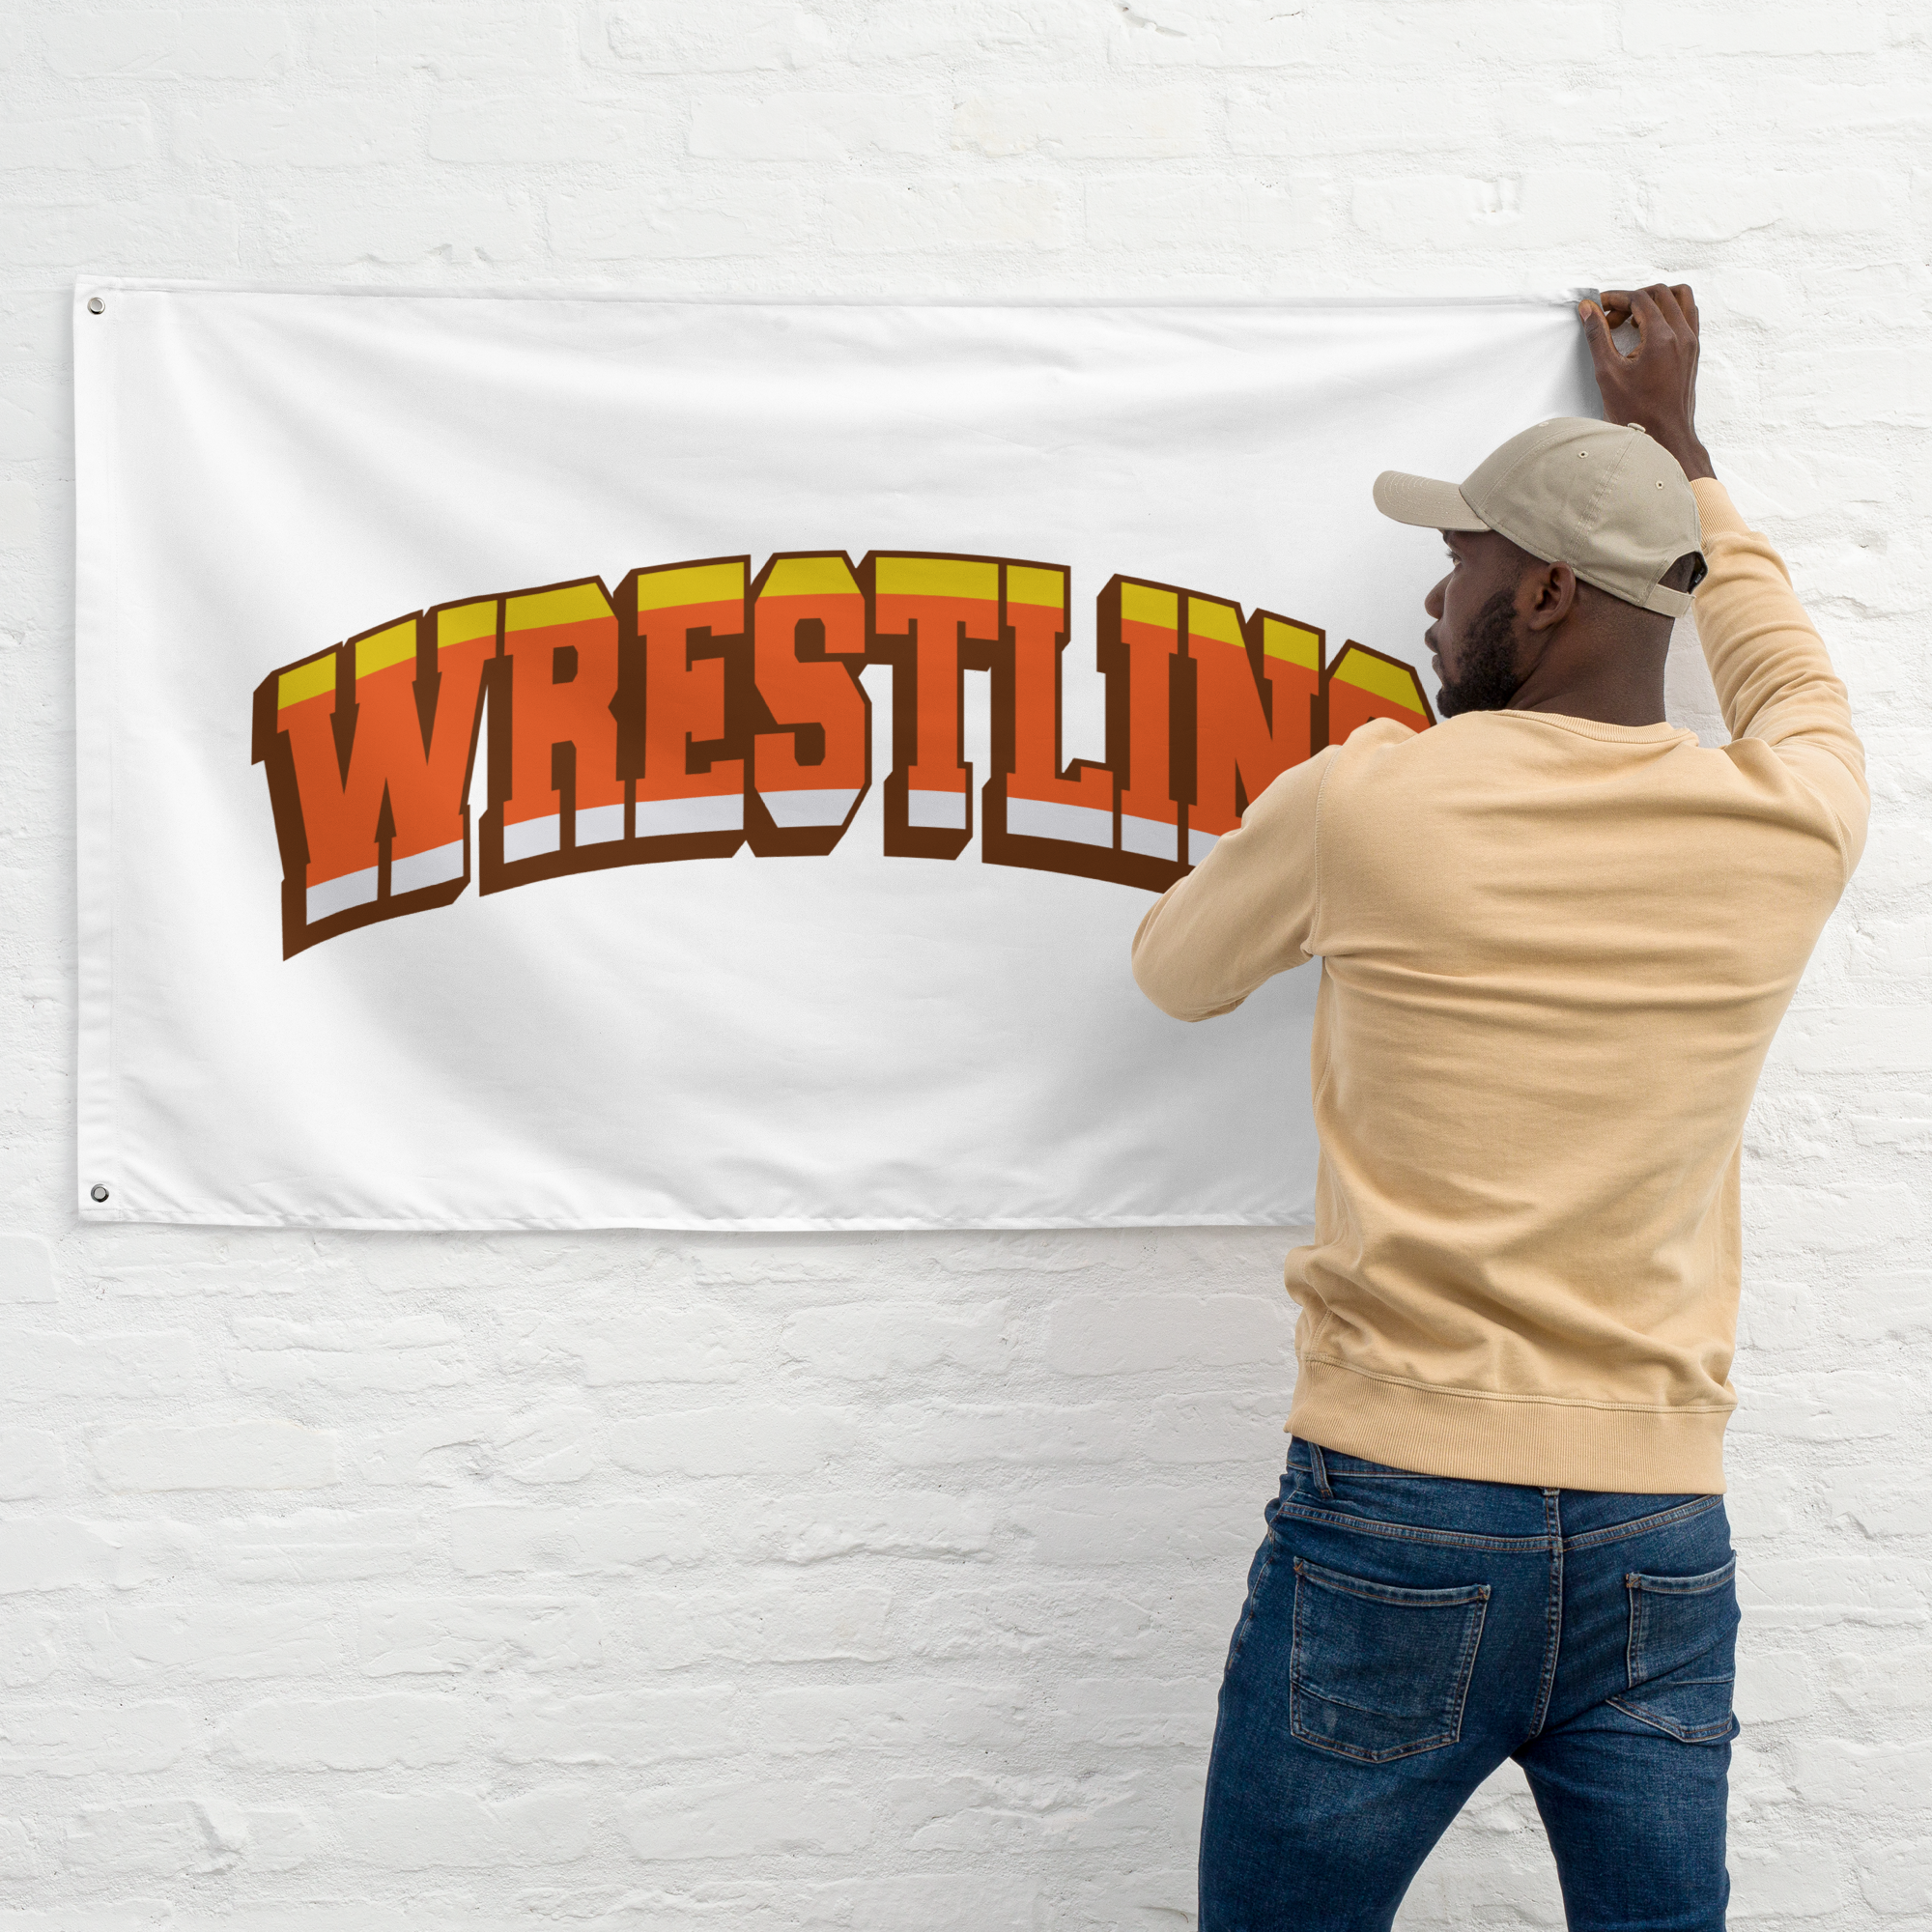 Candy Corn Wrestling Flag - The Defensive Pin